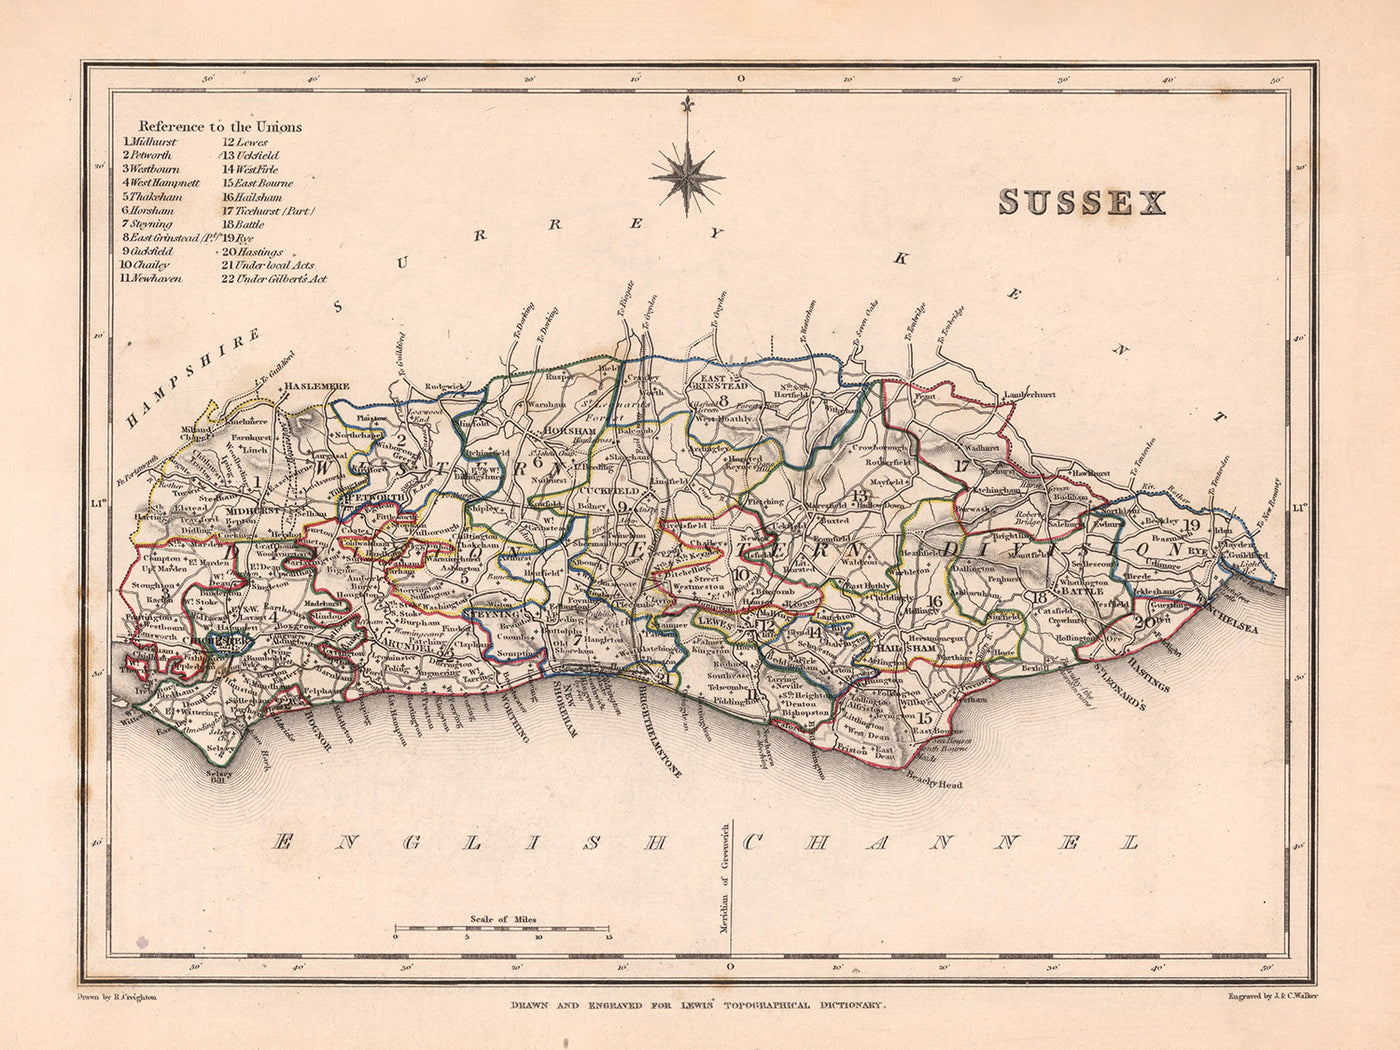 Old Map of East and West Sussex by Samuel Lewis, 1844: Brighton, Crawley, Worthing, Eastbourne, and Hastings